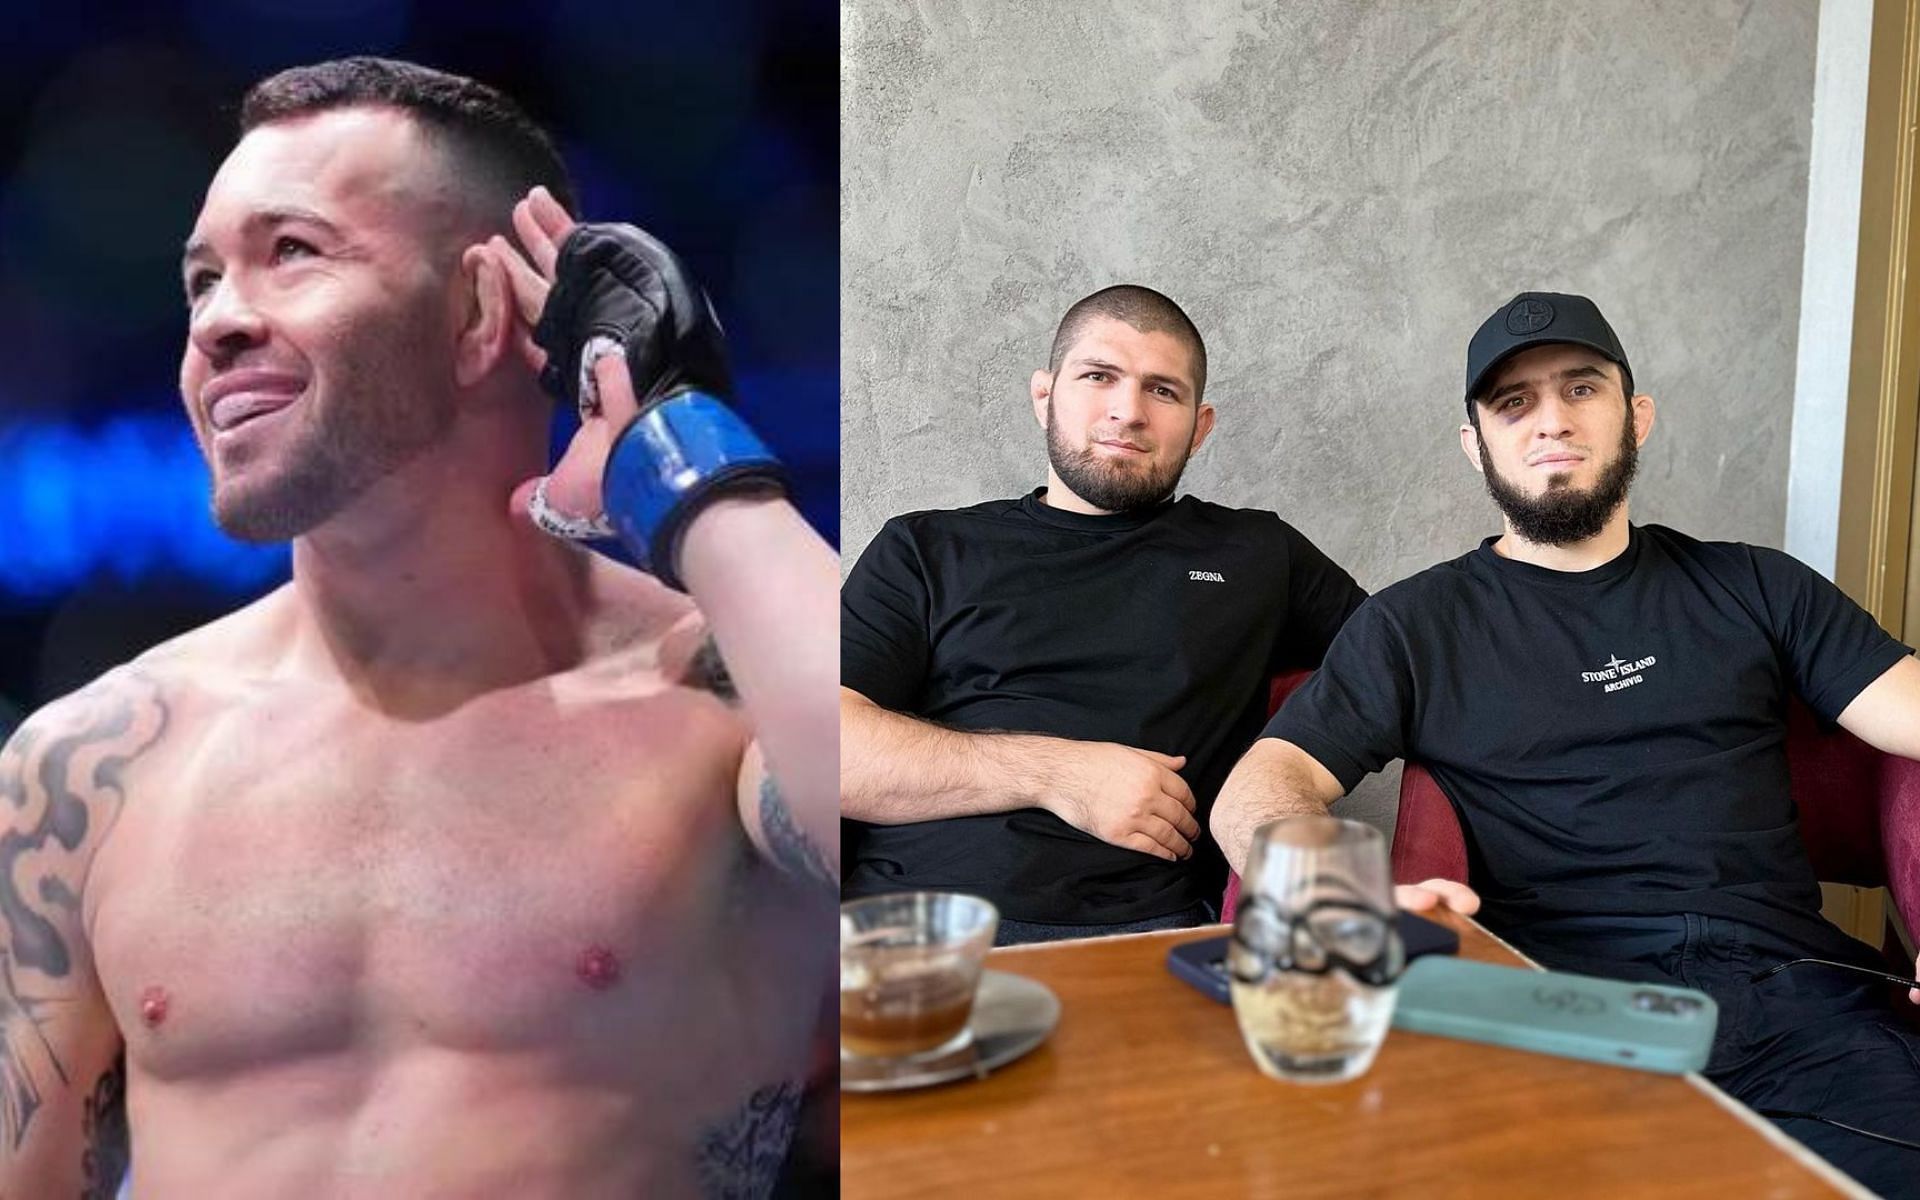 Colby Covington (left) and Khabib Nurmagomedov and Islam Makhachev (right) (Image credits @islam_makhachev on Instagram and @FightDoctor_ on Twitter)